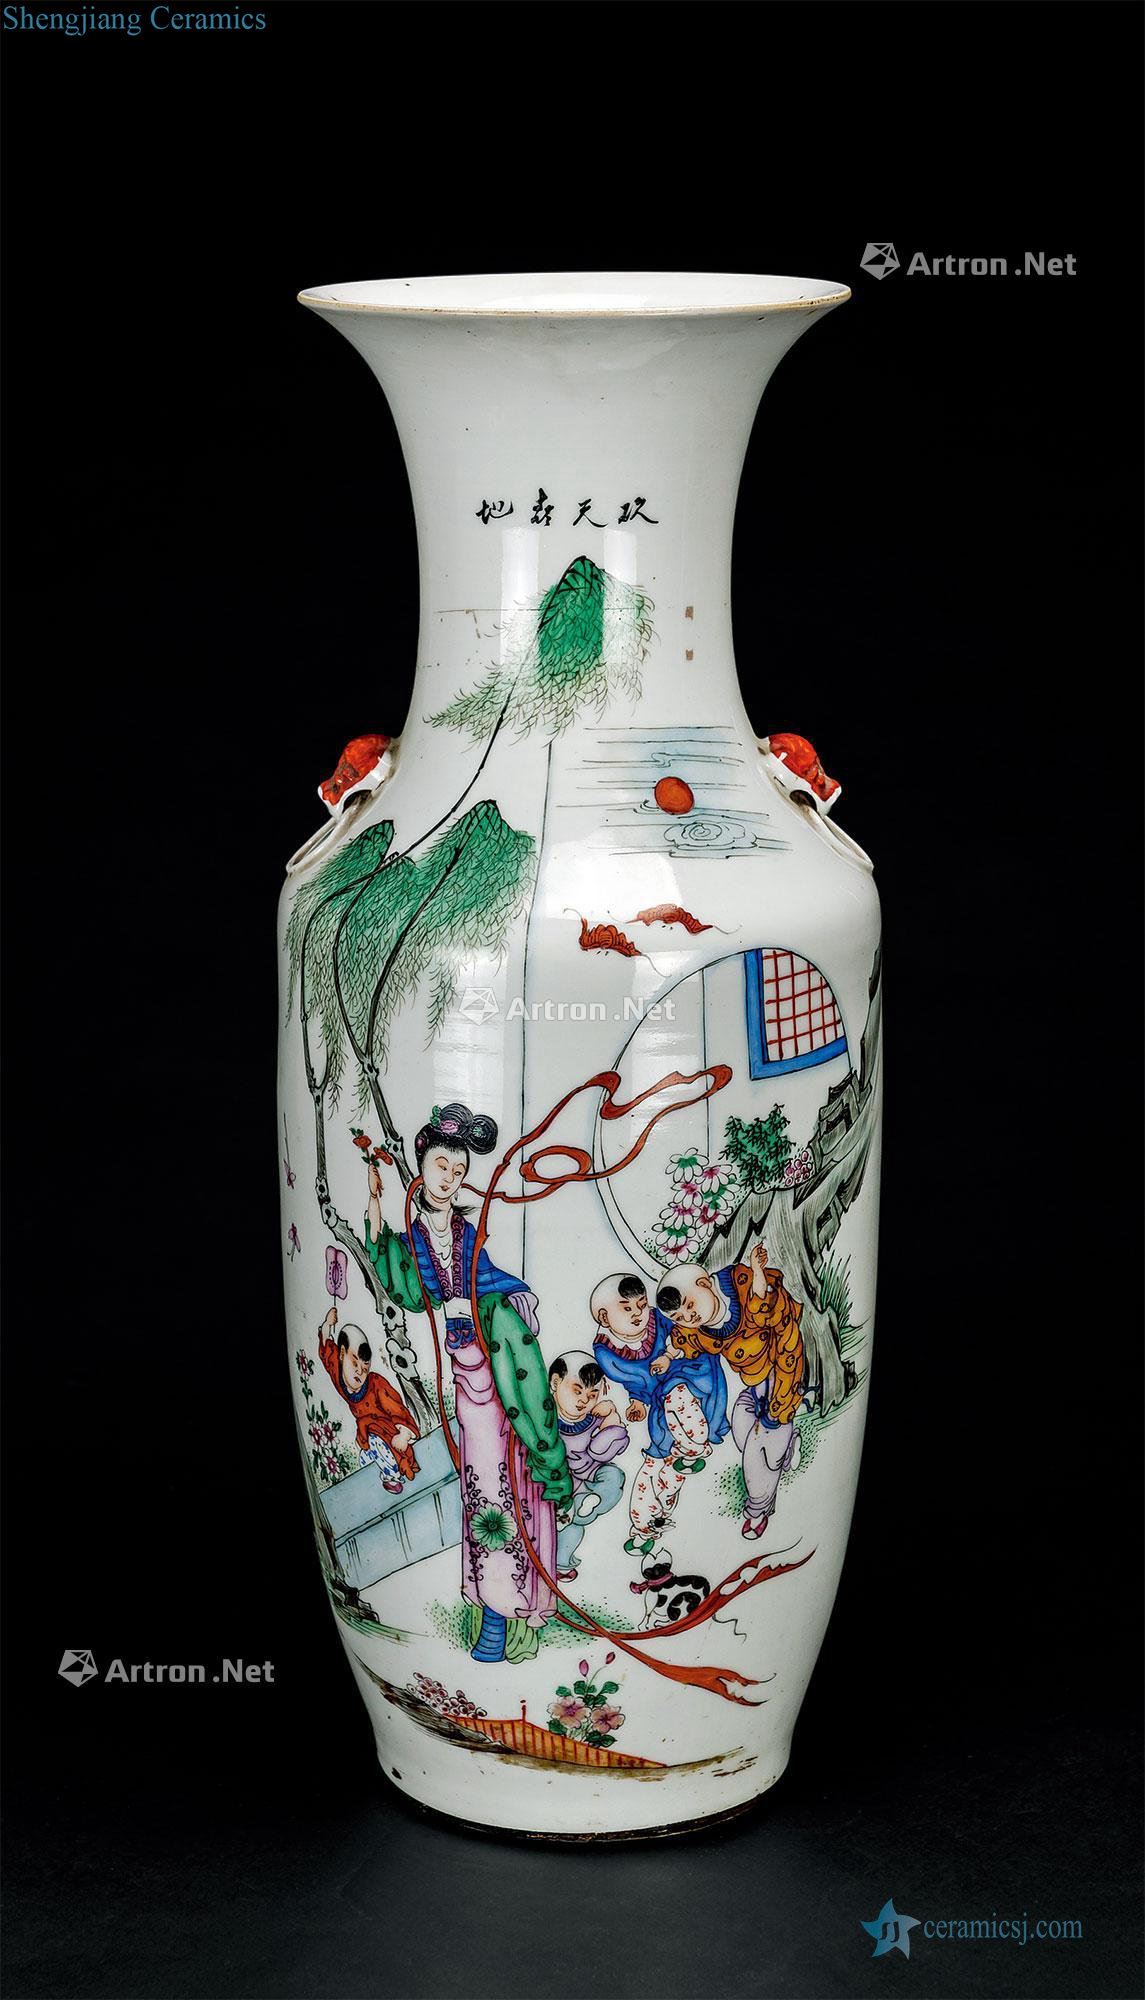 /powder enamel of the republic of China in late qing dynasty "happy" big vase with wood